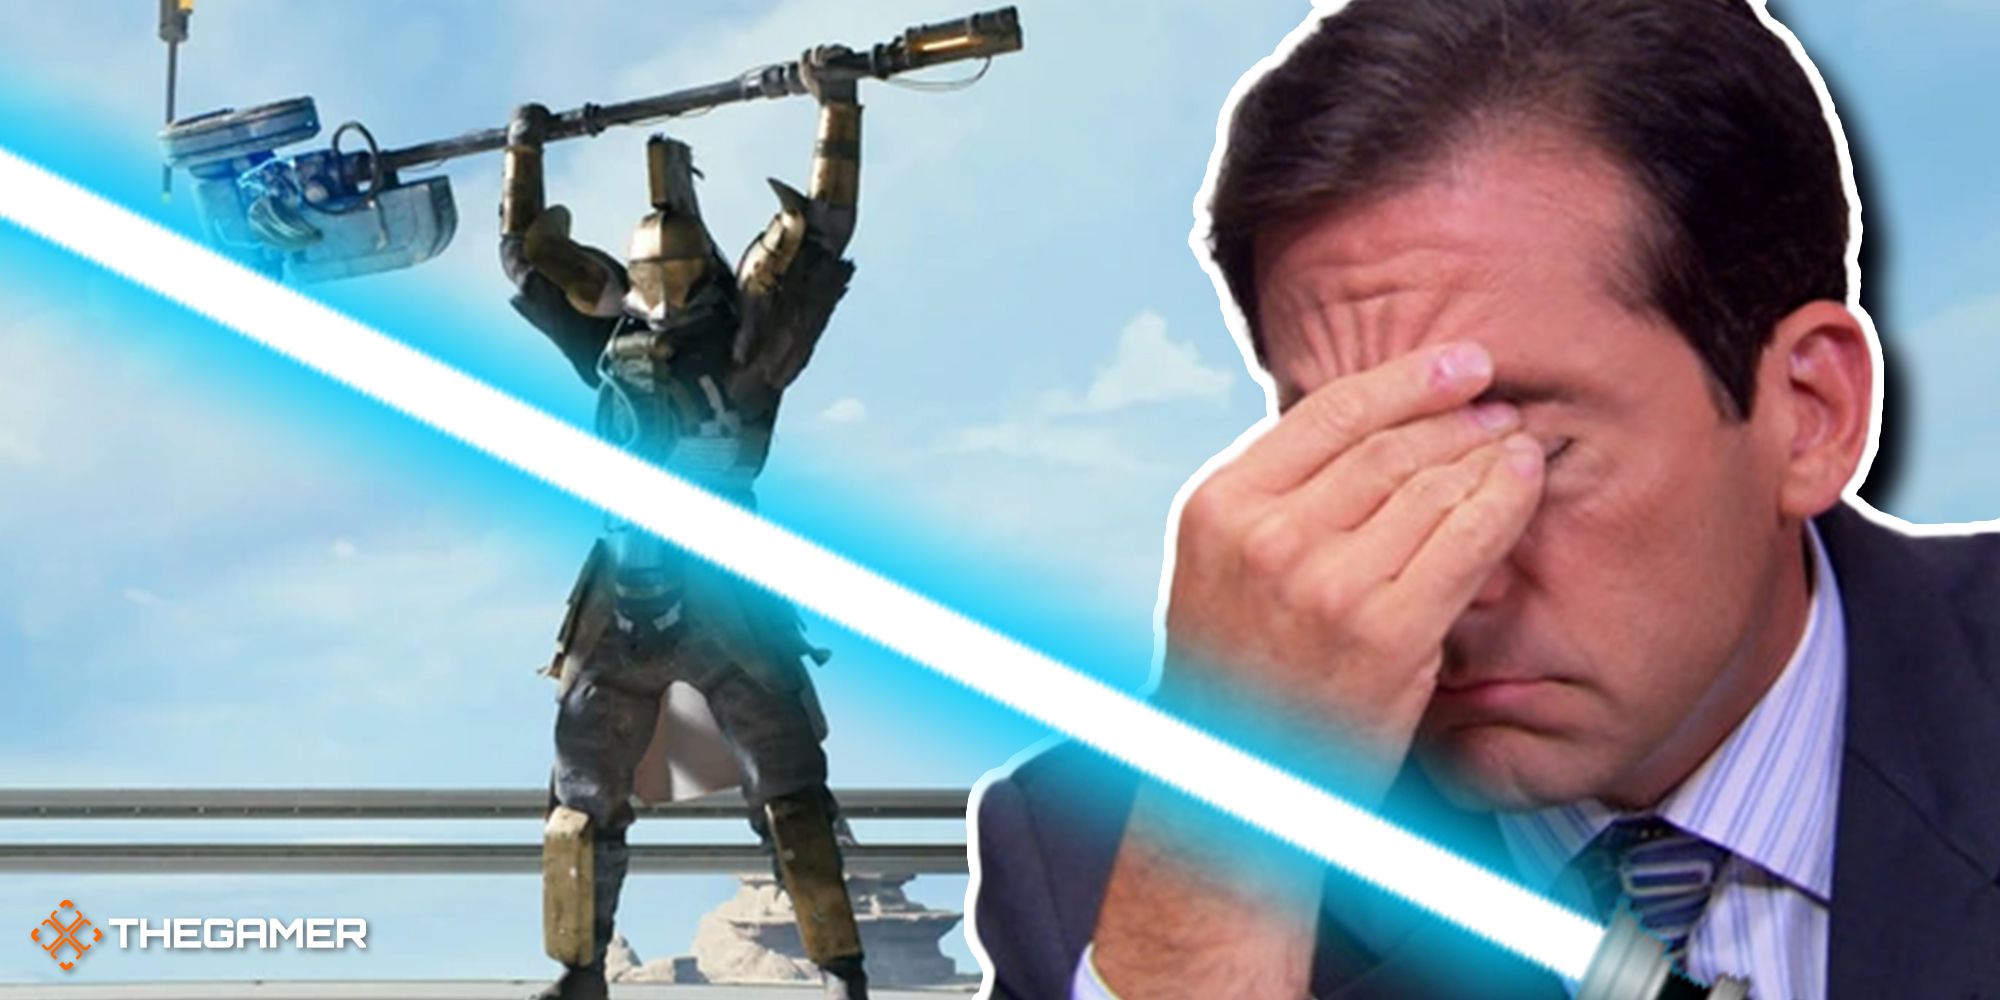 A Bedlam Smasher lifting its hammer in the background, Steve Carell as Michael Scott facepalming with a lightsaber in his other hand in the foreground